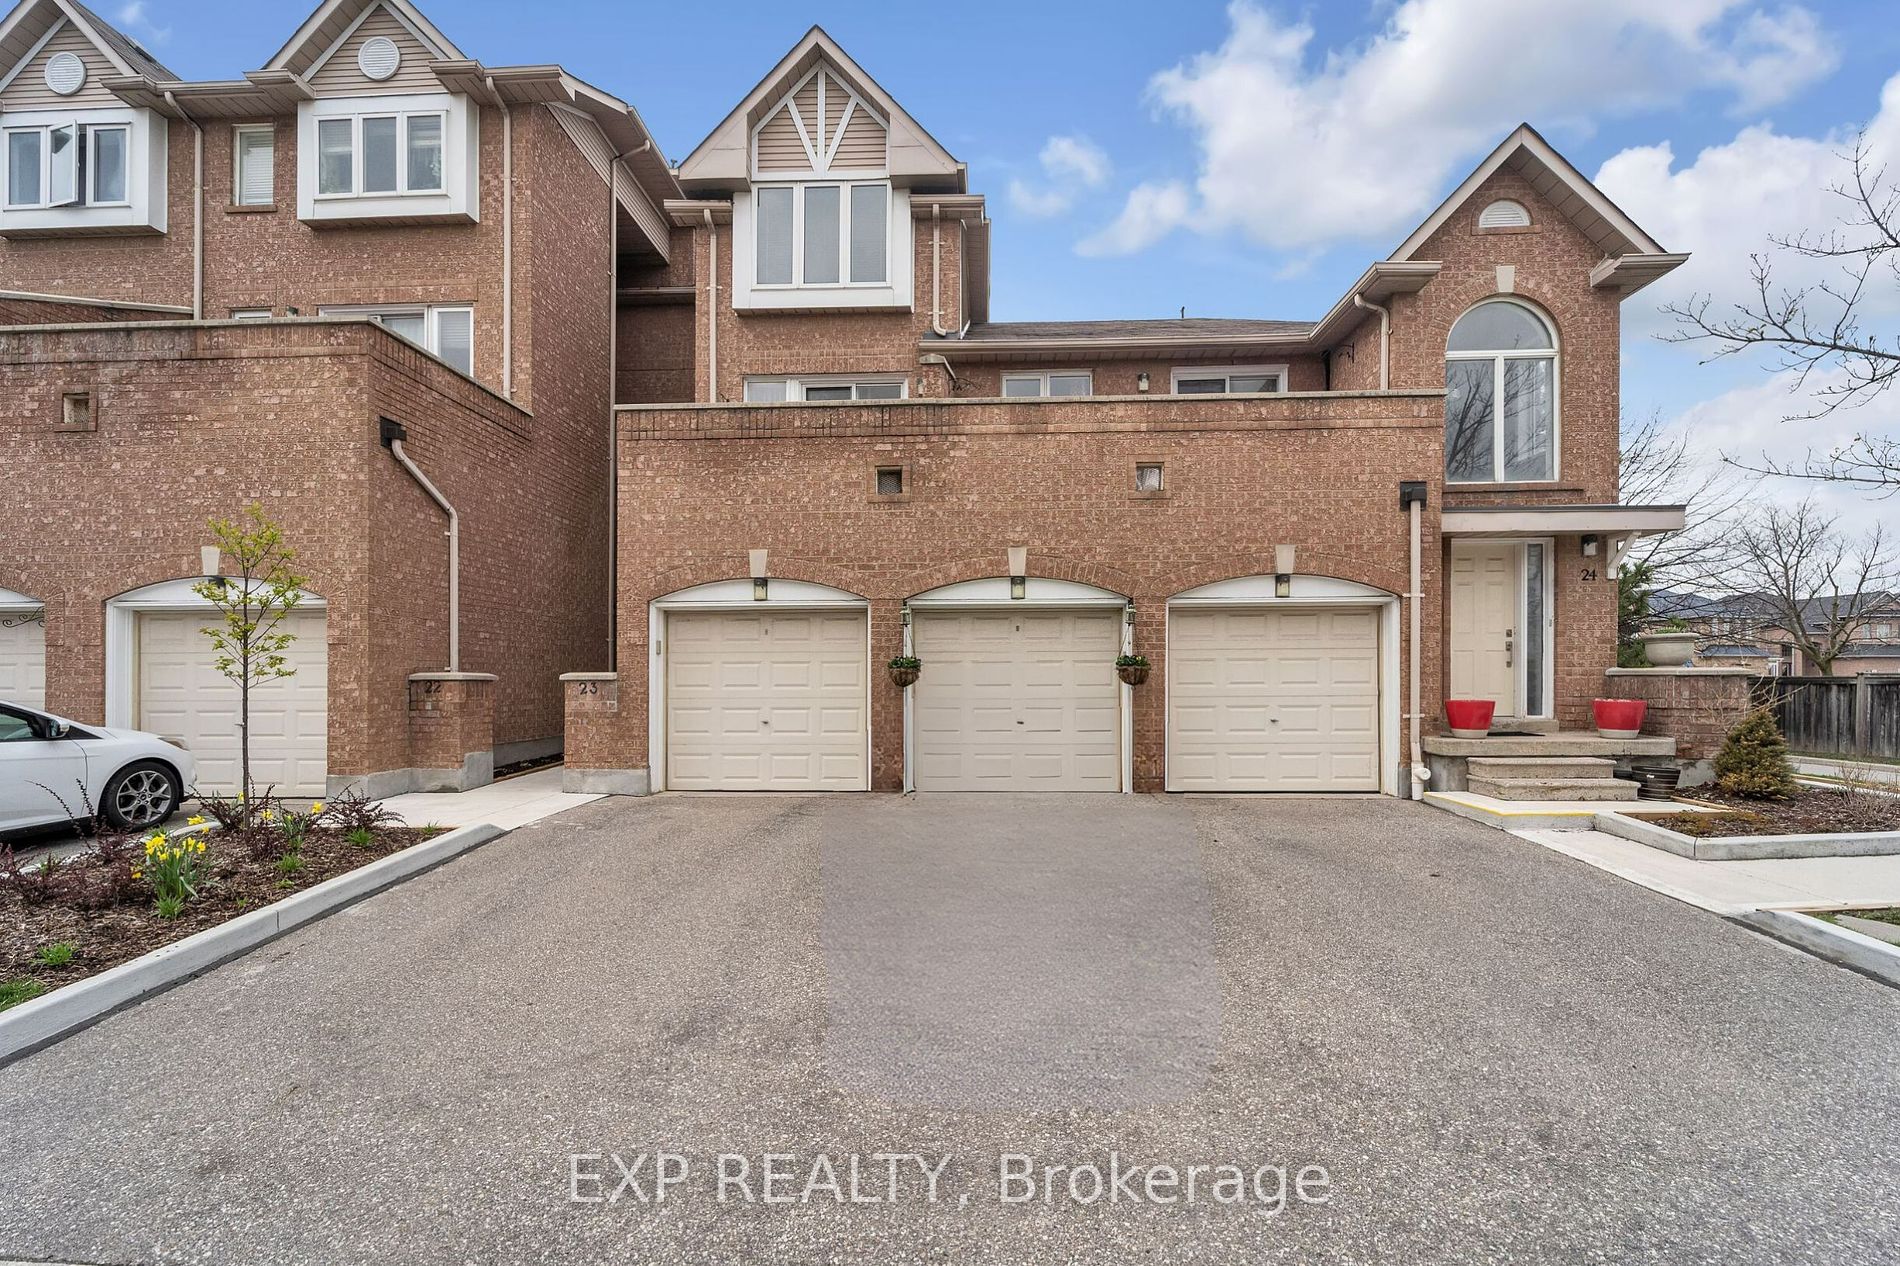 Condo Townhouse house for sale at 115 Bristol Rd E Mississauga Ontario